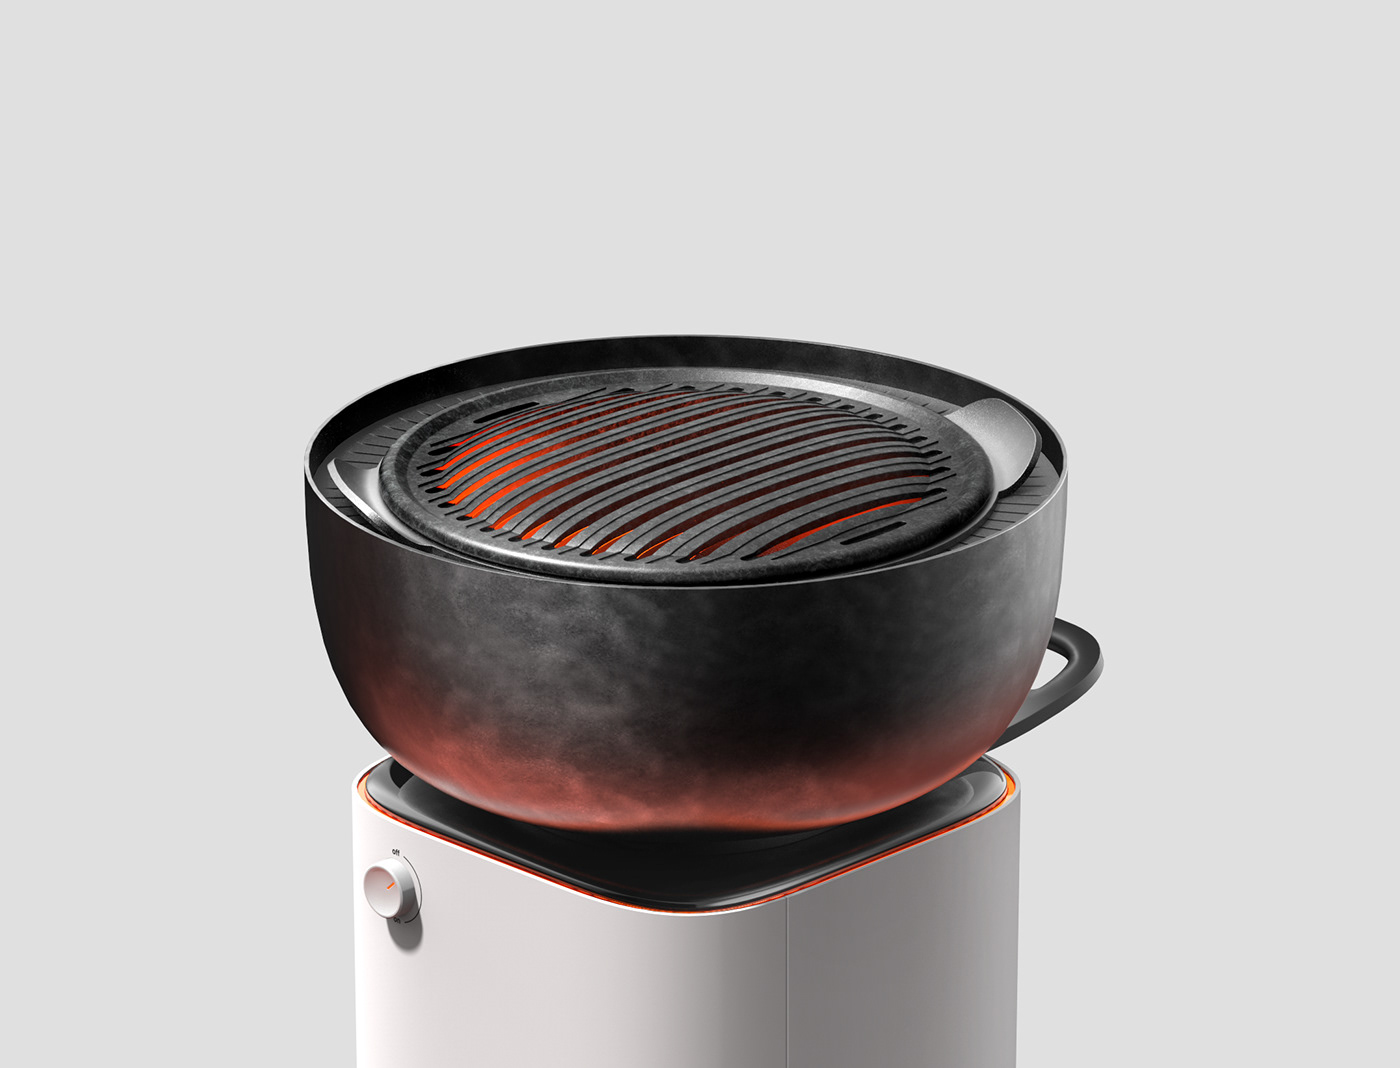 barbeque BBQ campin camping grill industrial design  Outdoor product product design  weekend works